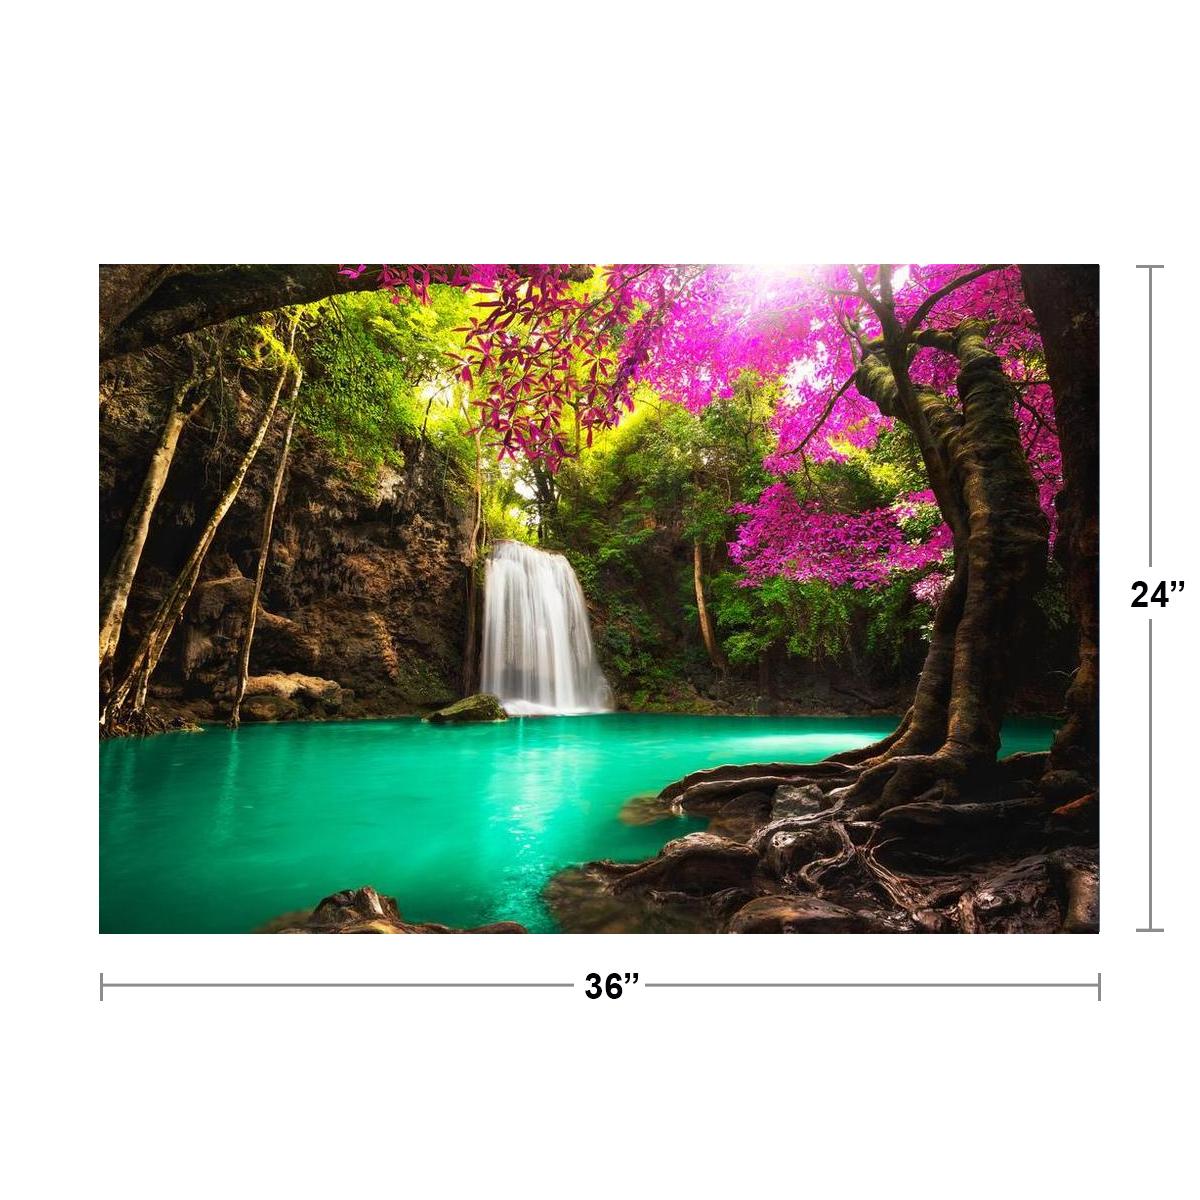 Beautiful Waterfall in Tropical Forest Photo Photograph Cool Wall Decor Art  Print Poster 36x24